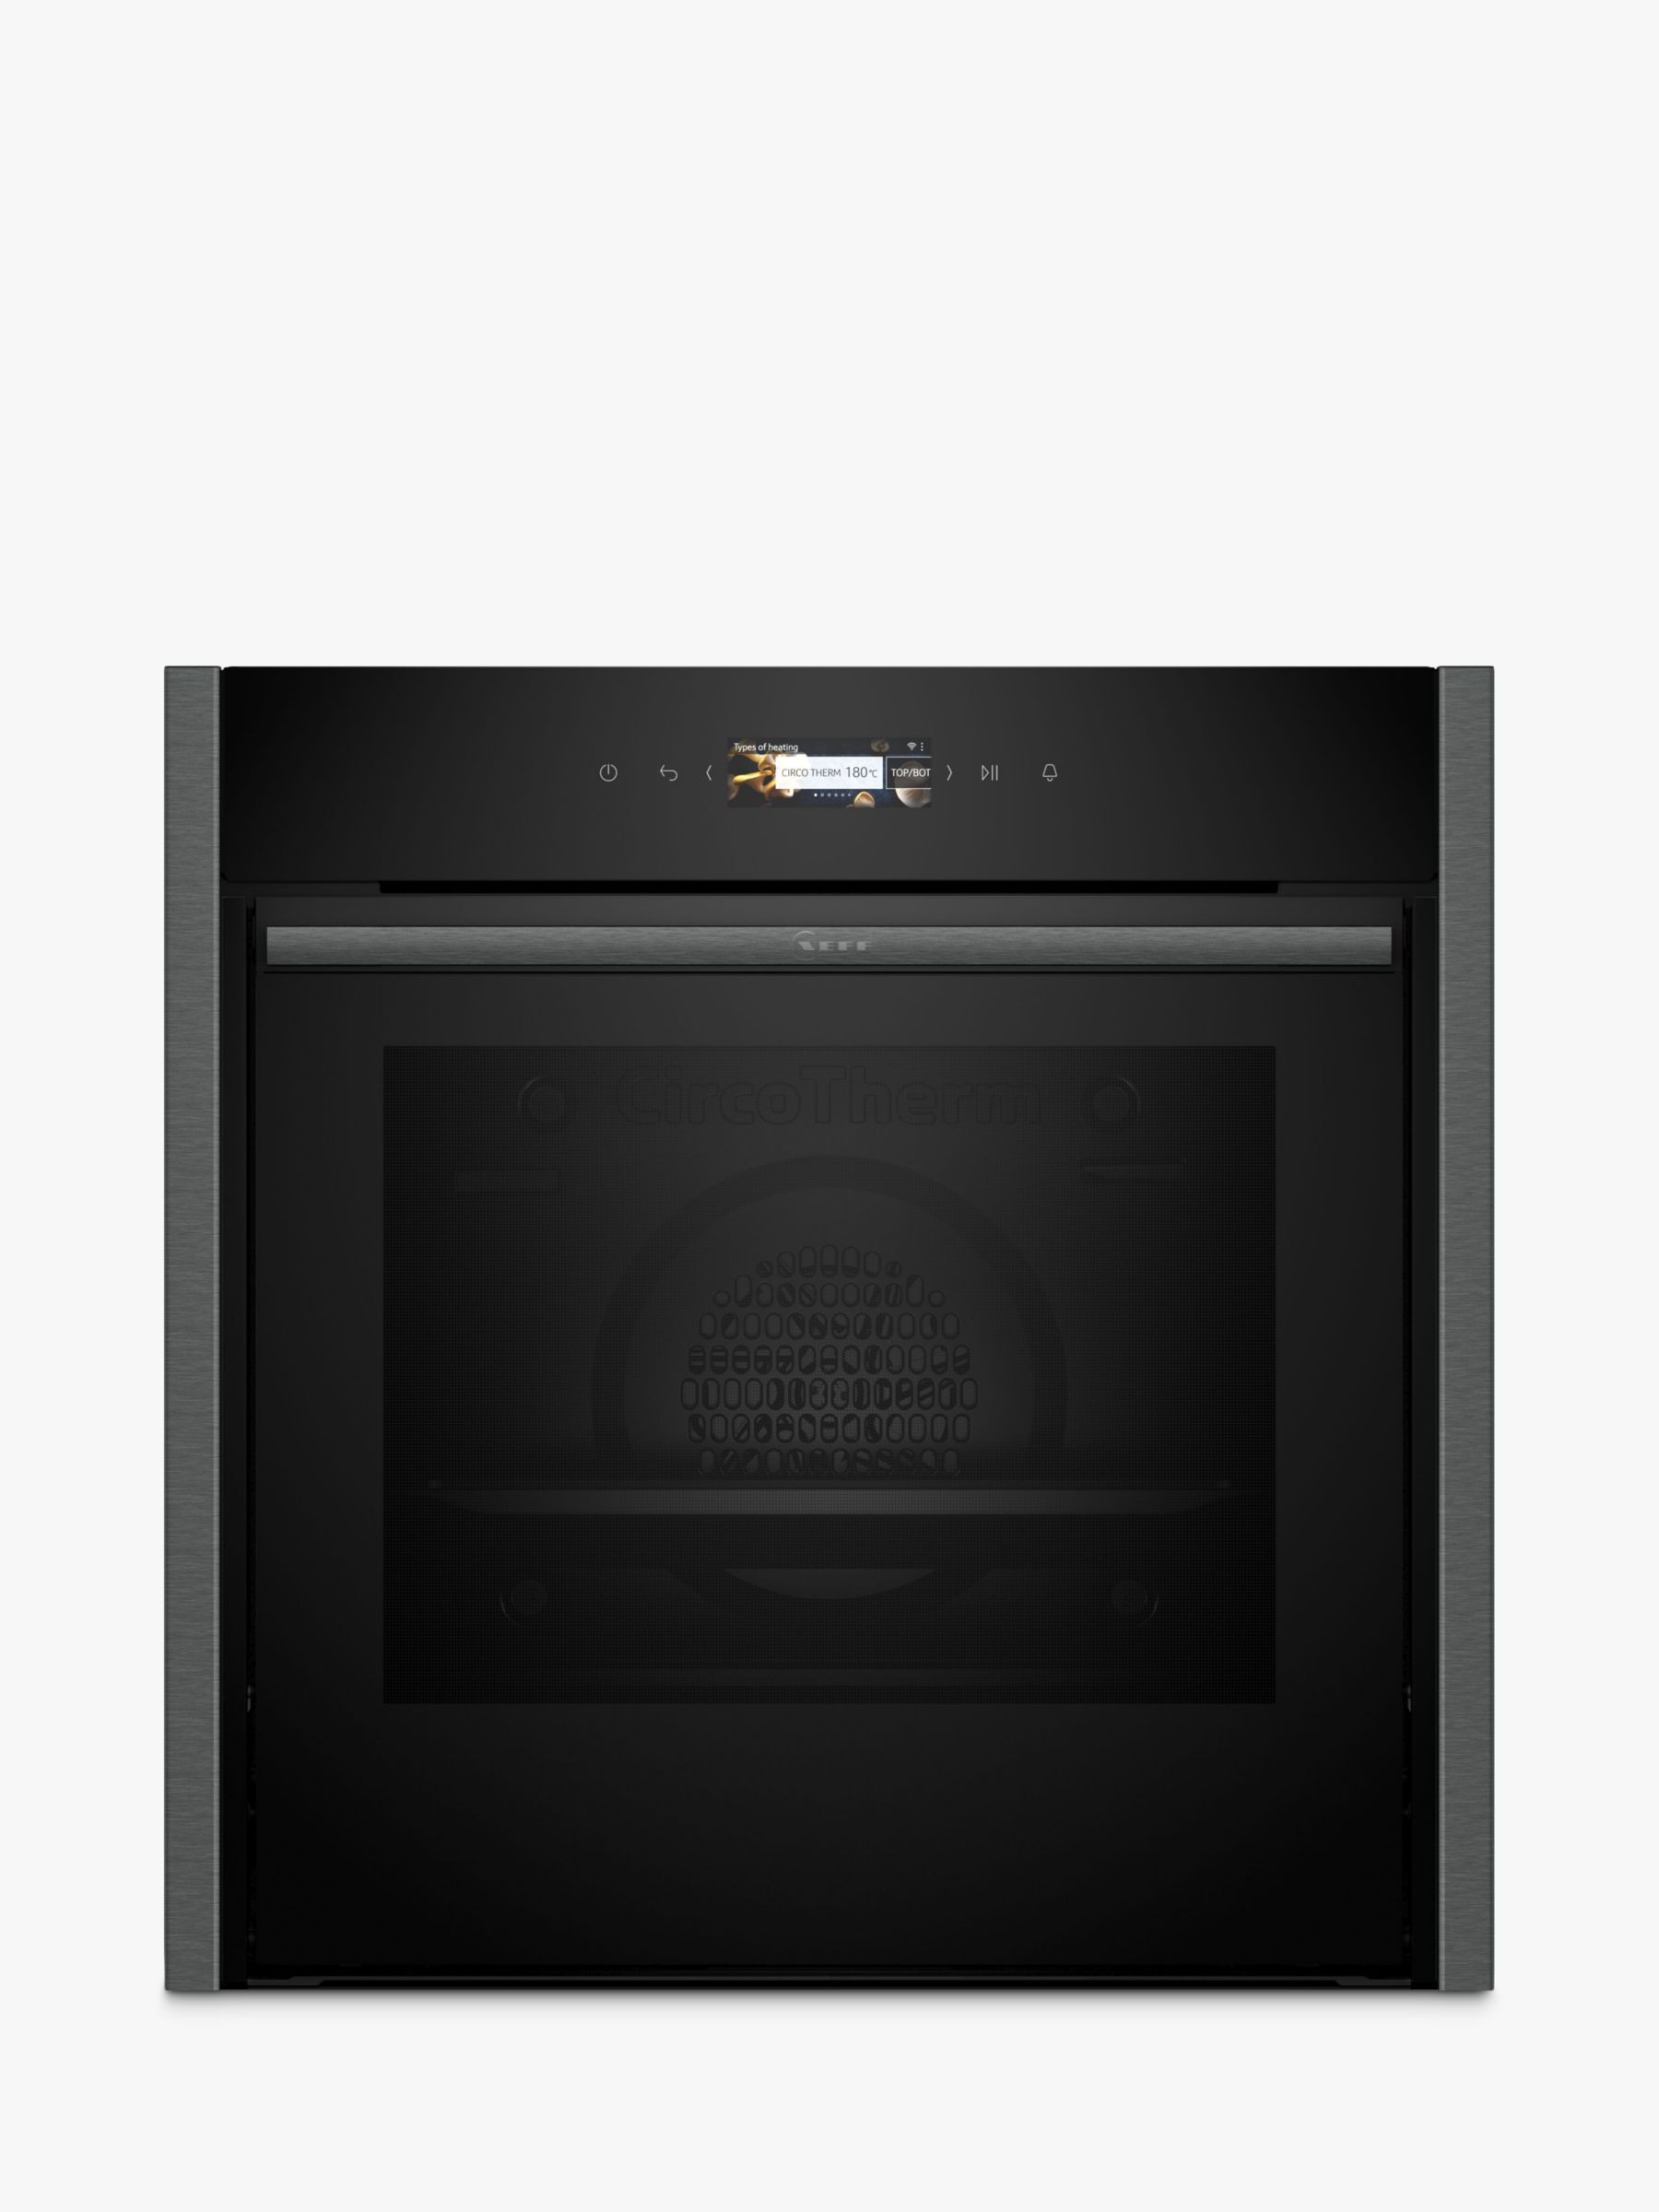 Neff N70 Slide and Hide B54CR71G0B Built In Self Cleaning Electric Single Oven, Grey Graphite